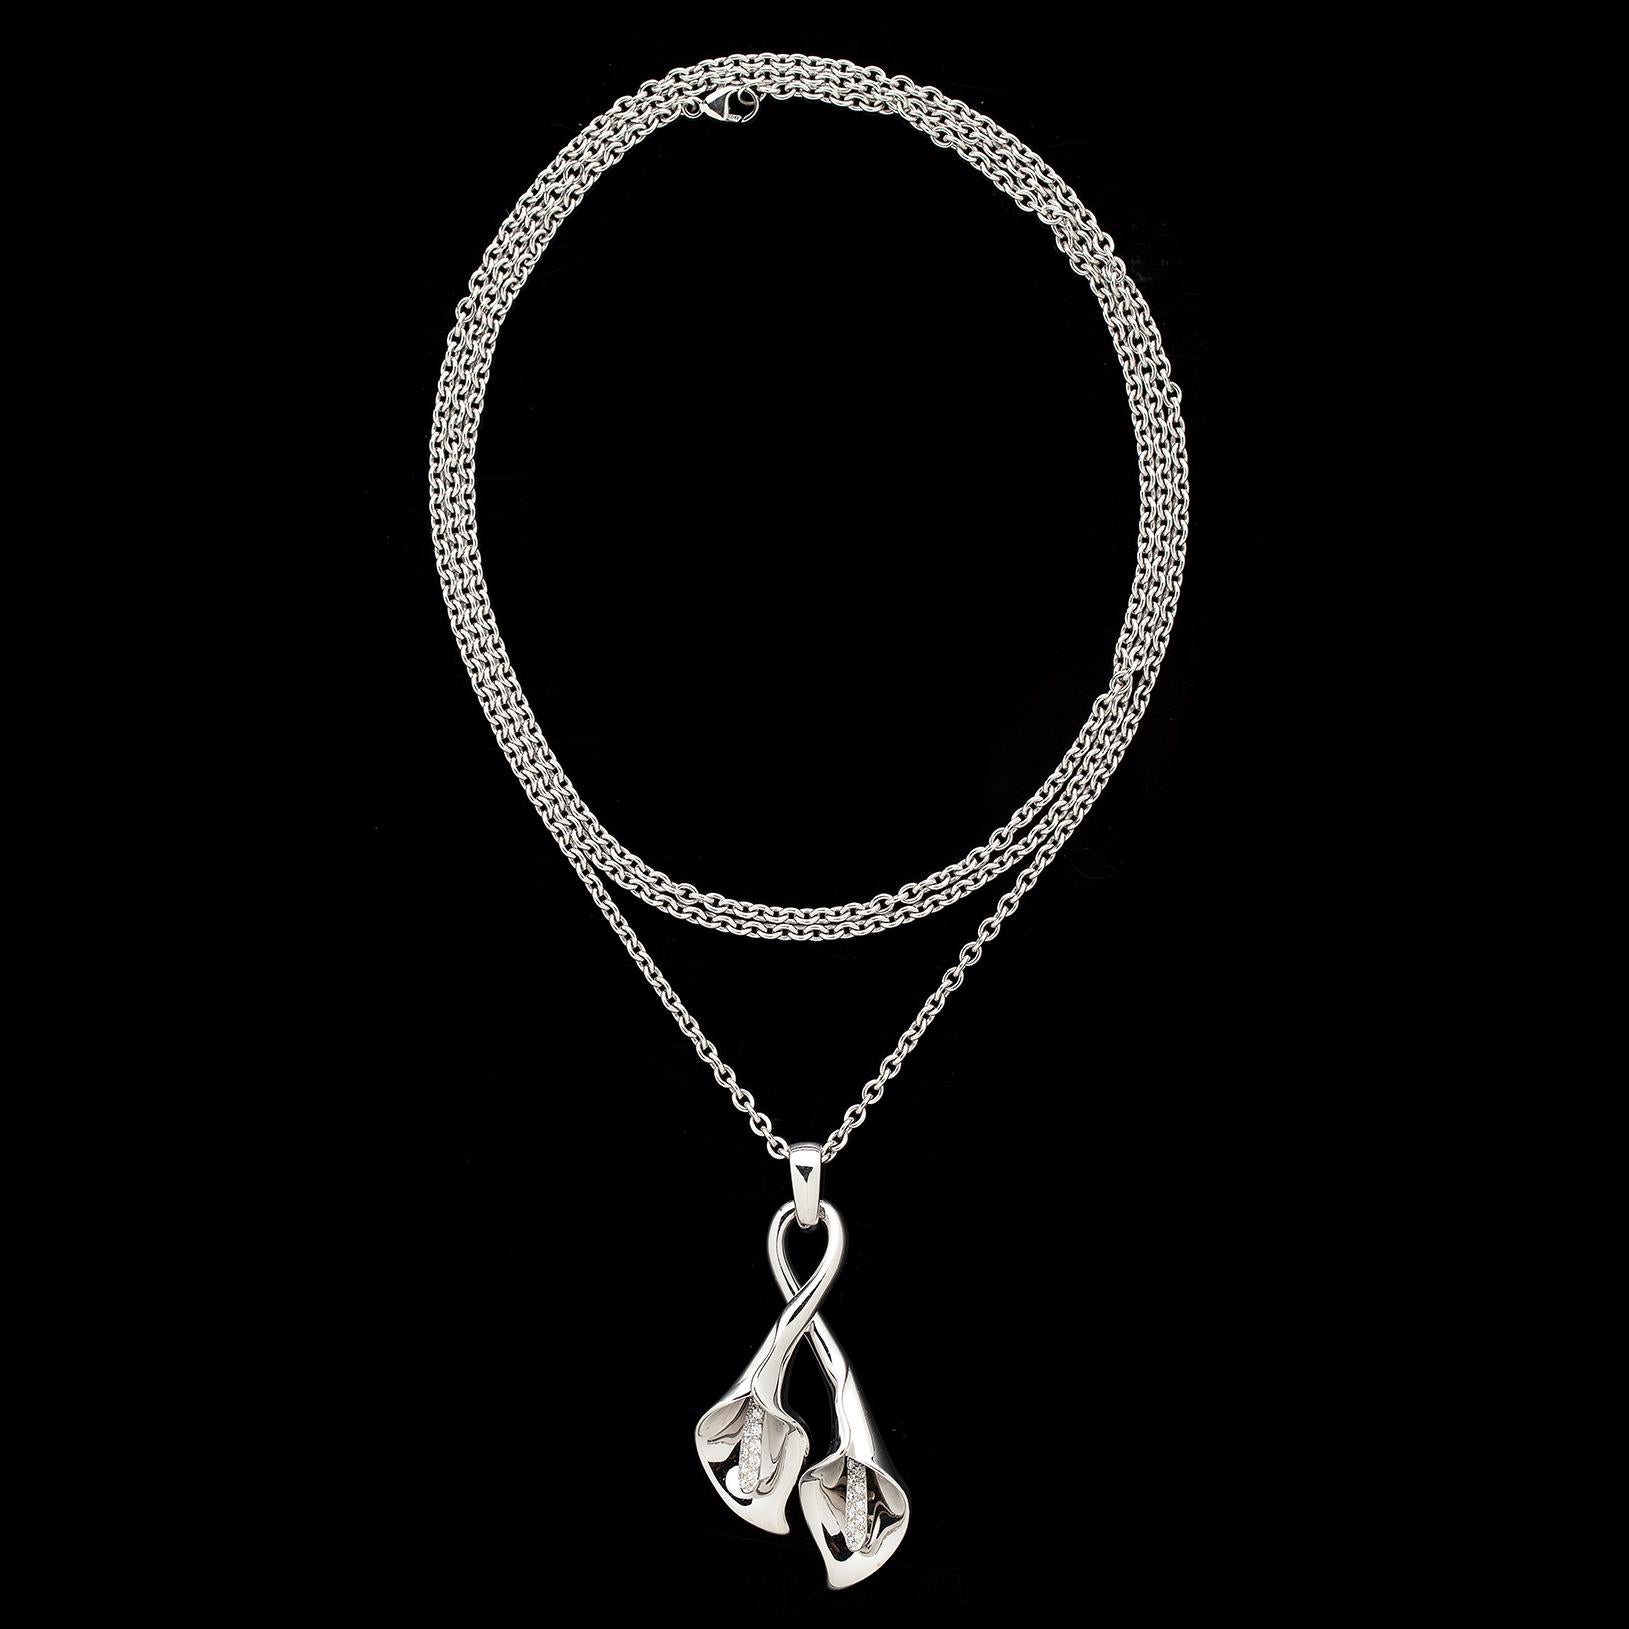 The 18k white gold pendant by Asprey is designed as a double Calla Lily, the stamens set with 24 round brilliant-cut diamonds weighing in total 0.24ct., and suspended from an 18k white gold chain. The pendant measures 2 1/8in., and the associated